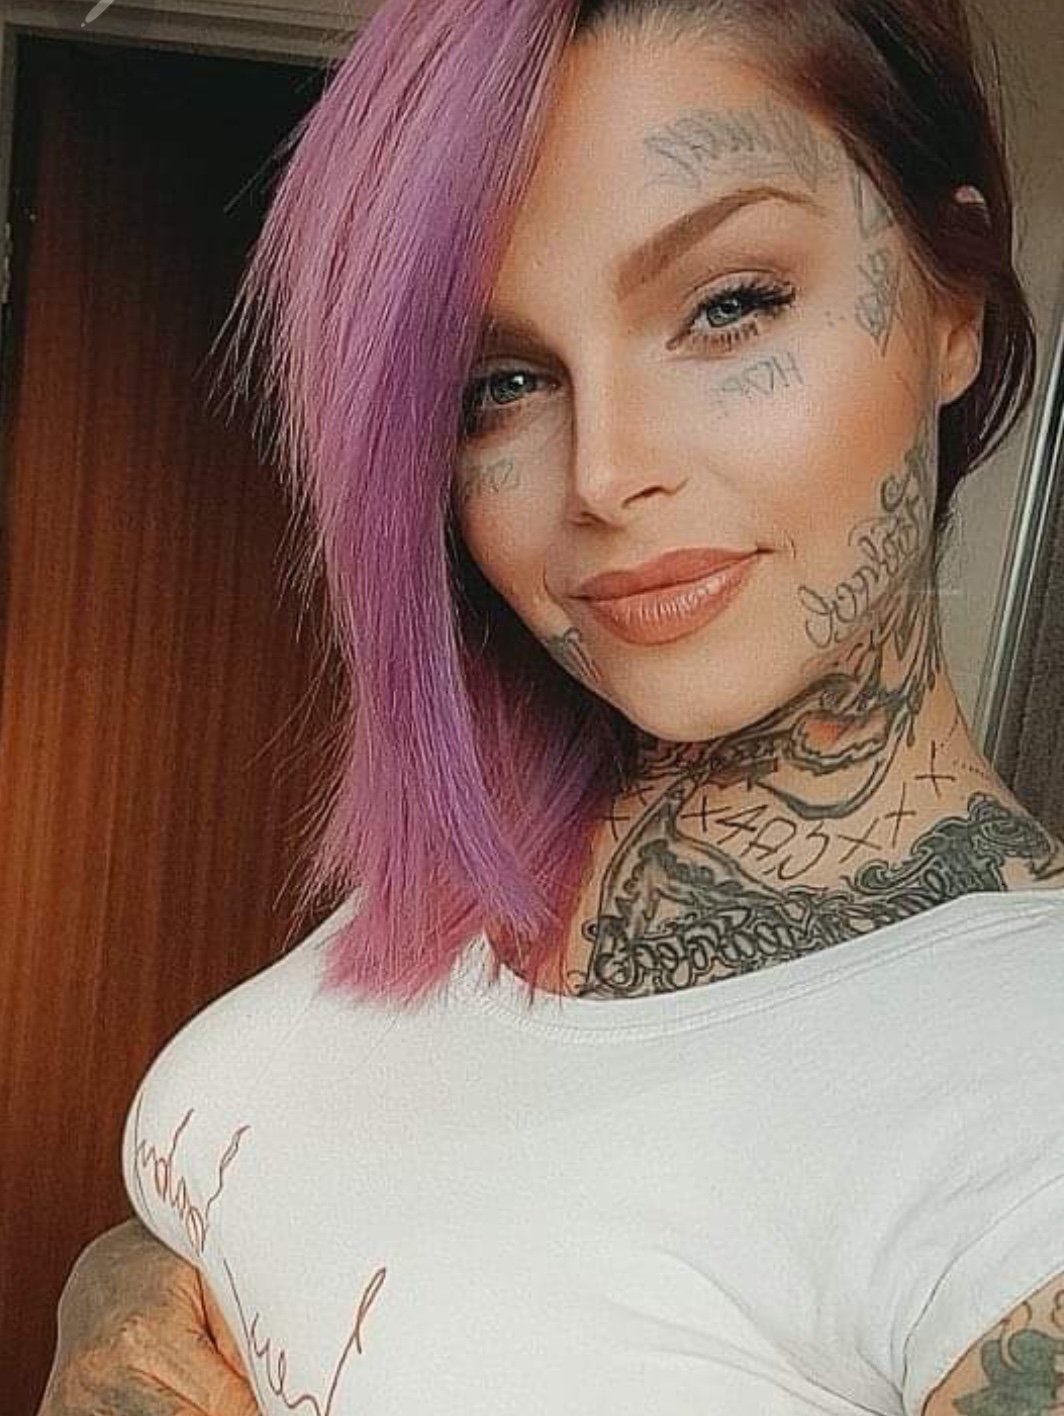 Mum who got face tattoos to beat drugs gets them covered up  Daily Star